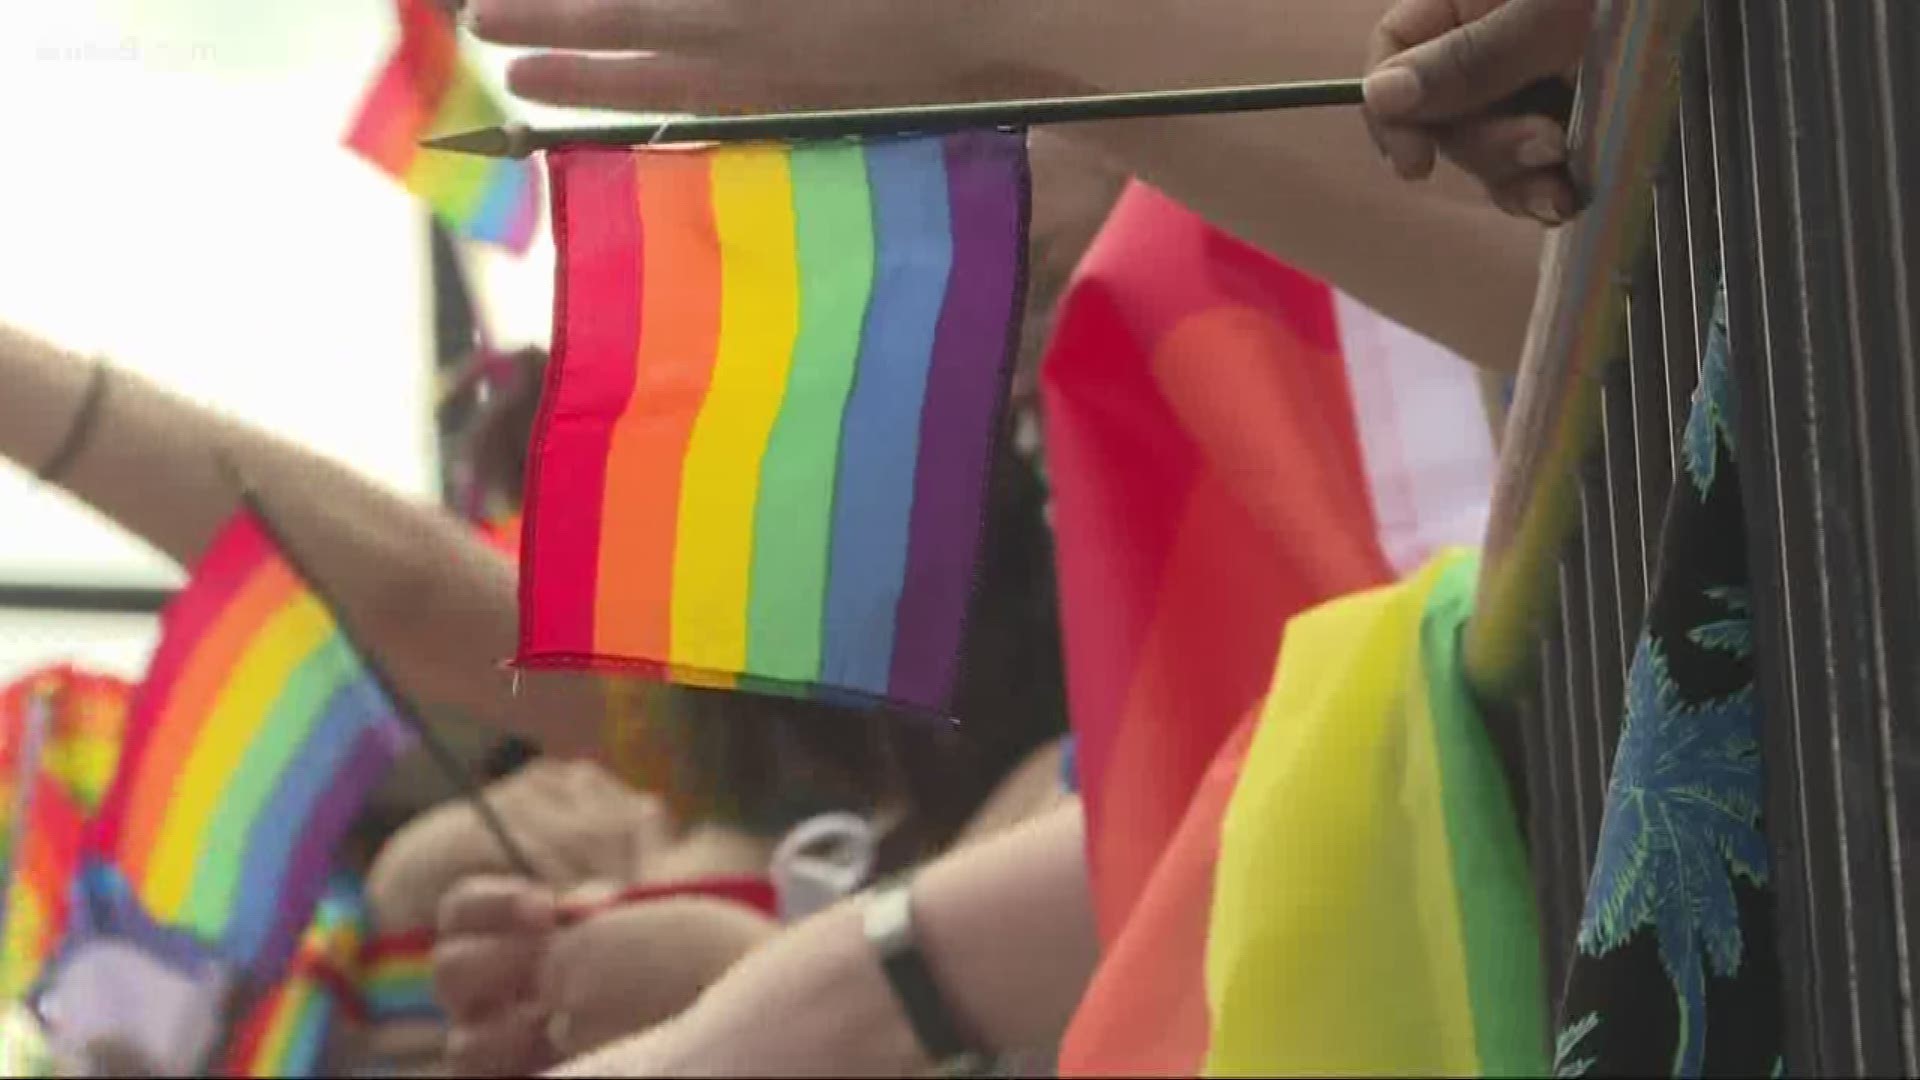 Before that unfortunate ending, the celebration brought thousands of people together to celebrate life, love and accepting people for who they are.  Pride Day also marked a significant anniversary -- 50 years after the brutal Stonewall Riots at a gaybar in New York City.